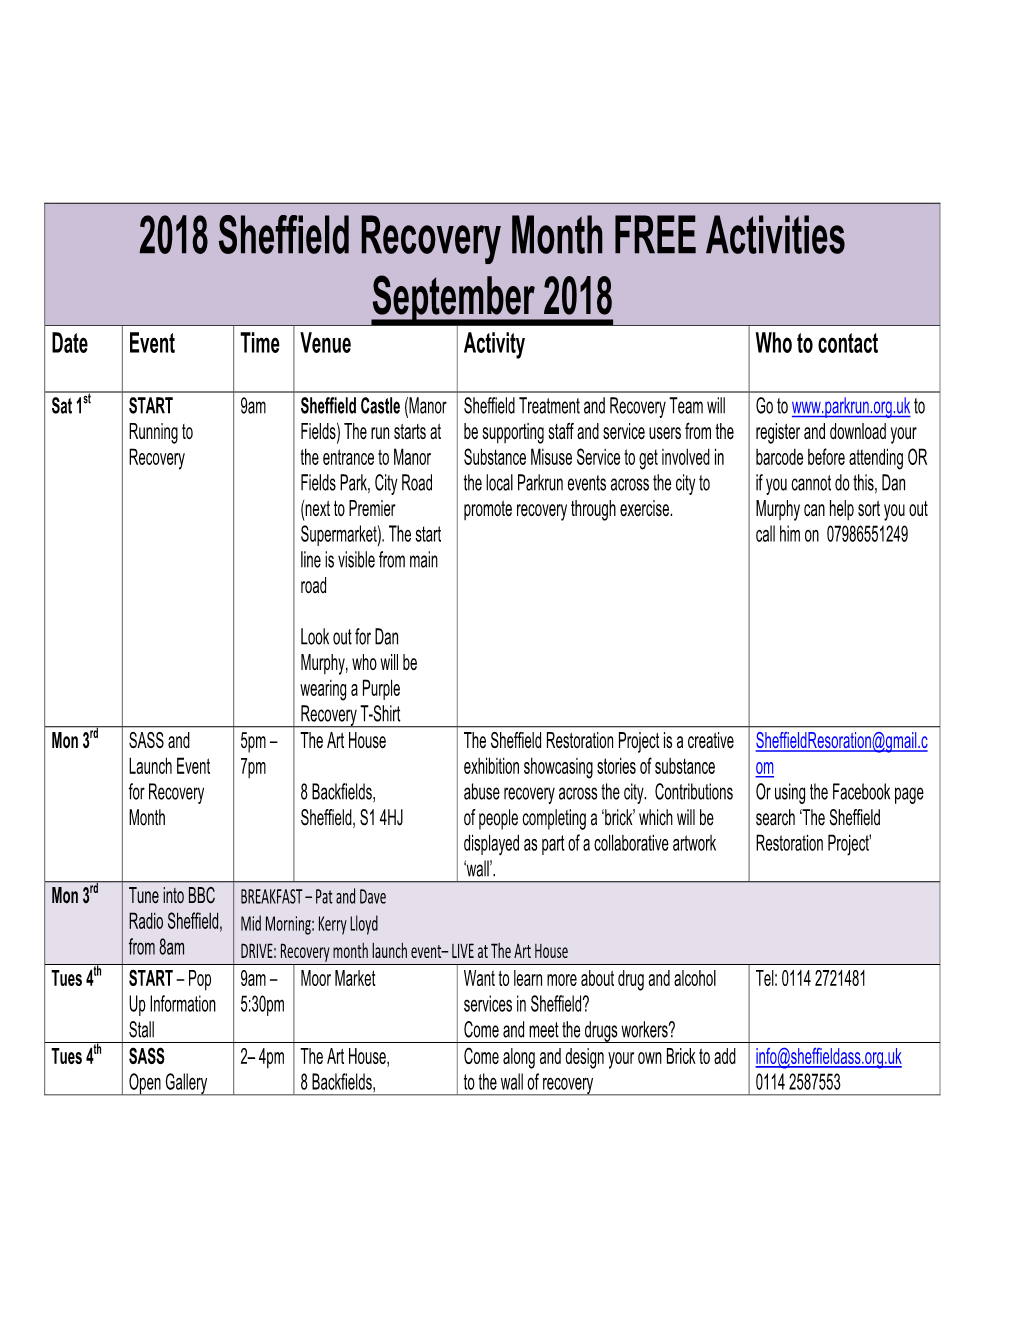 2018 Sheffield Recovery Month FREE Activities September 2018 Date Event Time Venue Activity Who to Contact